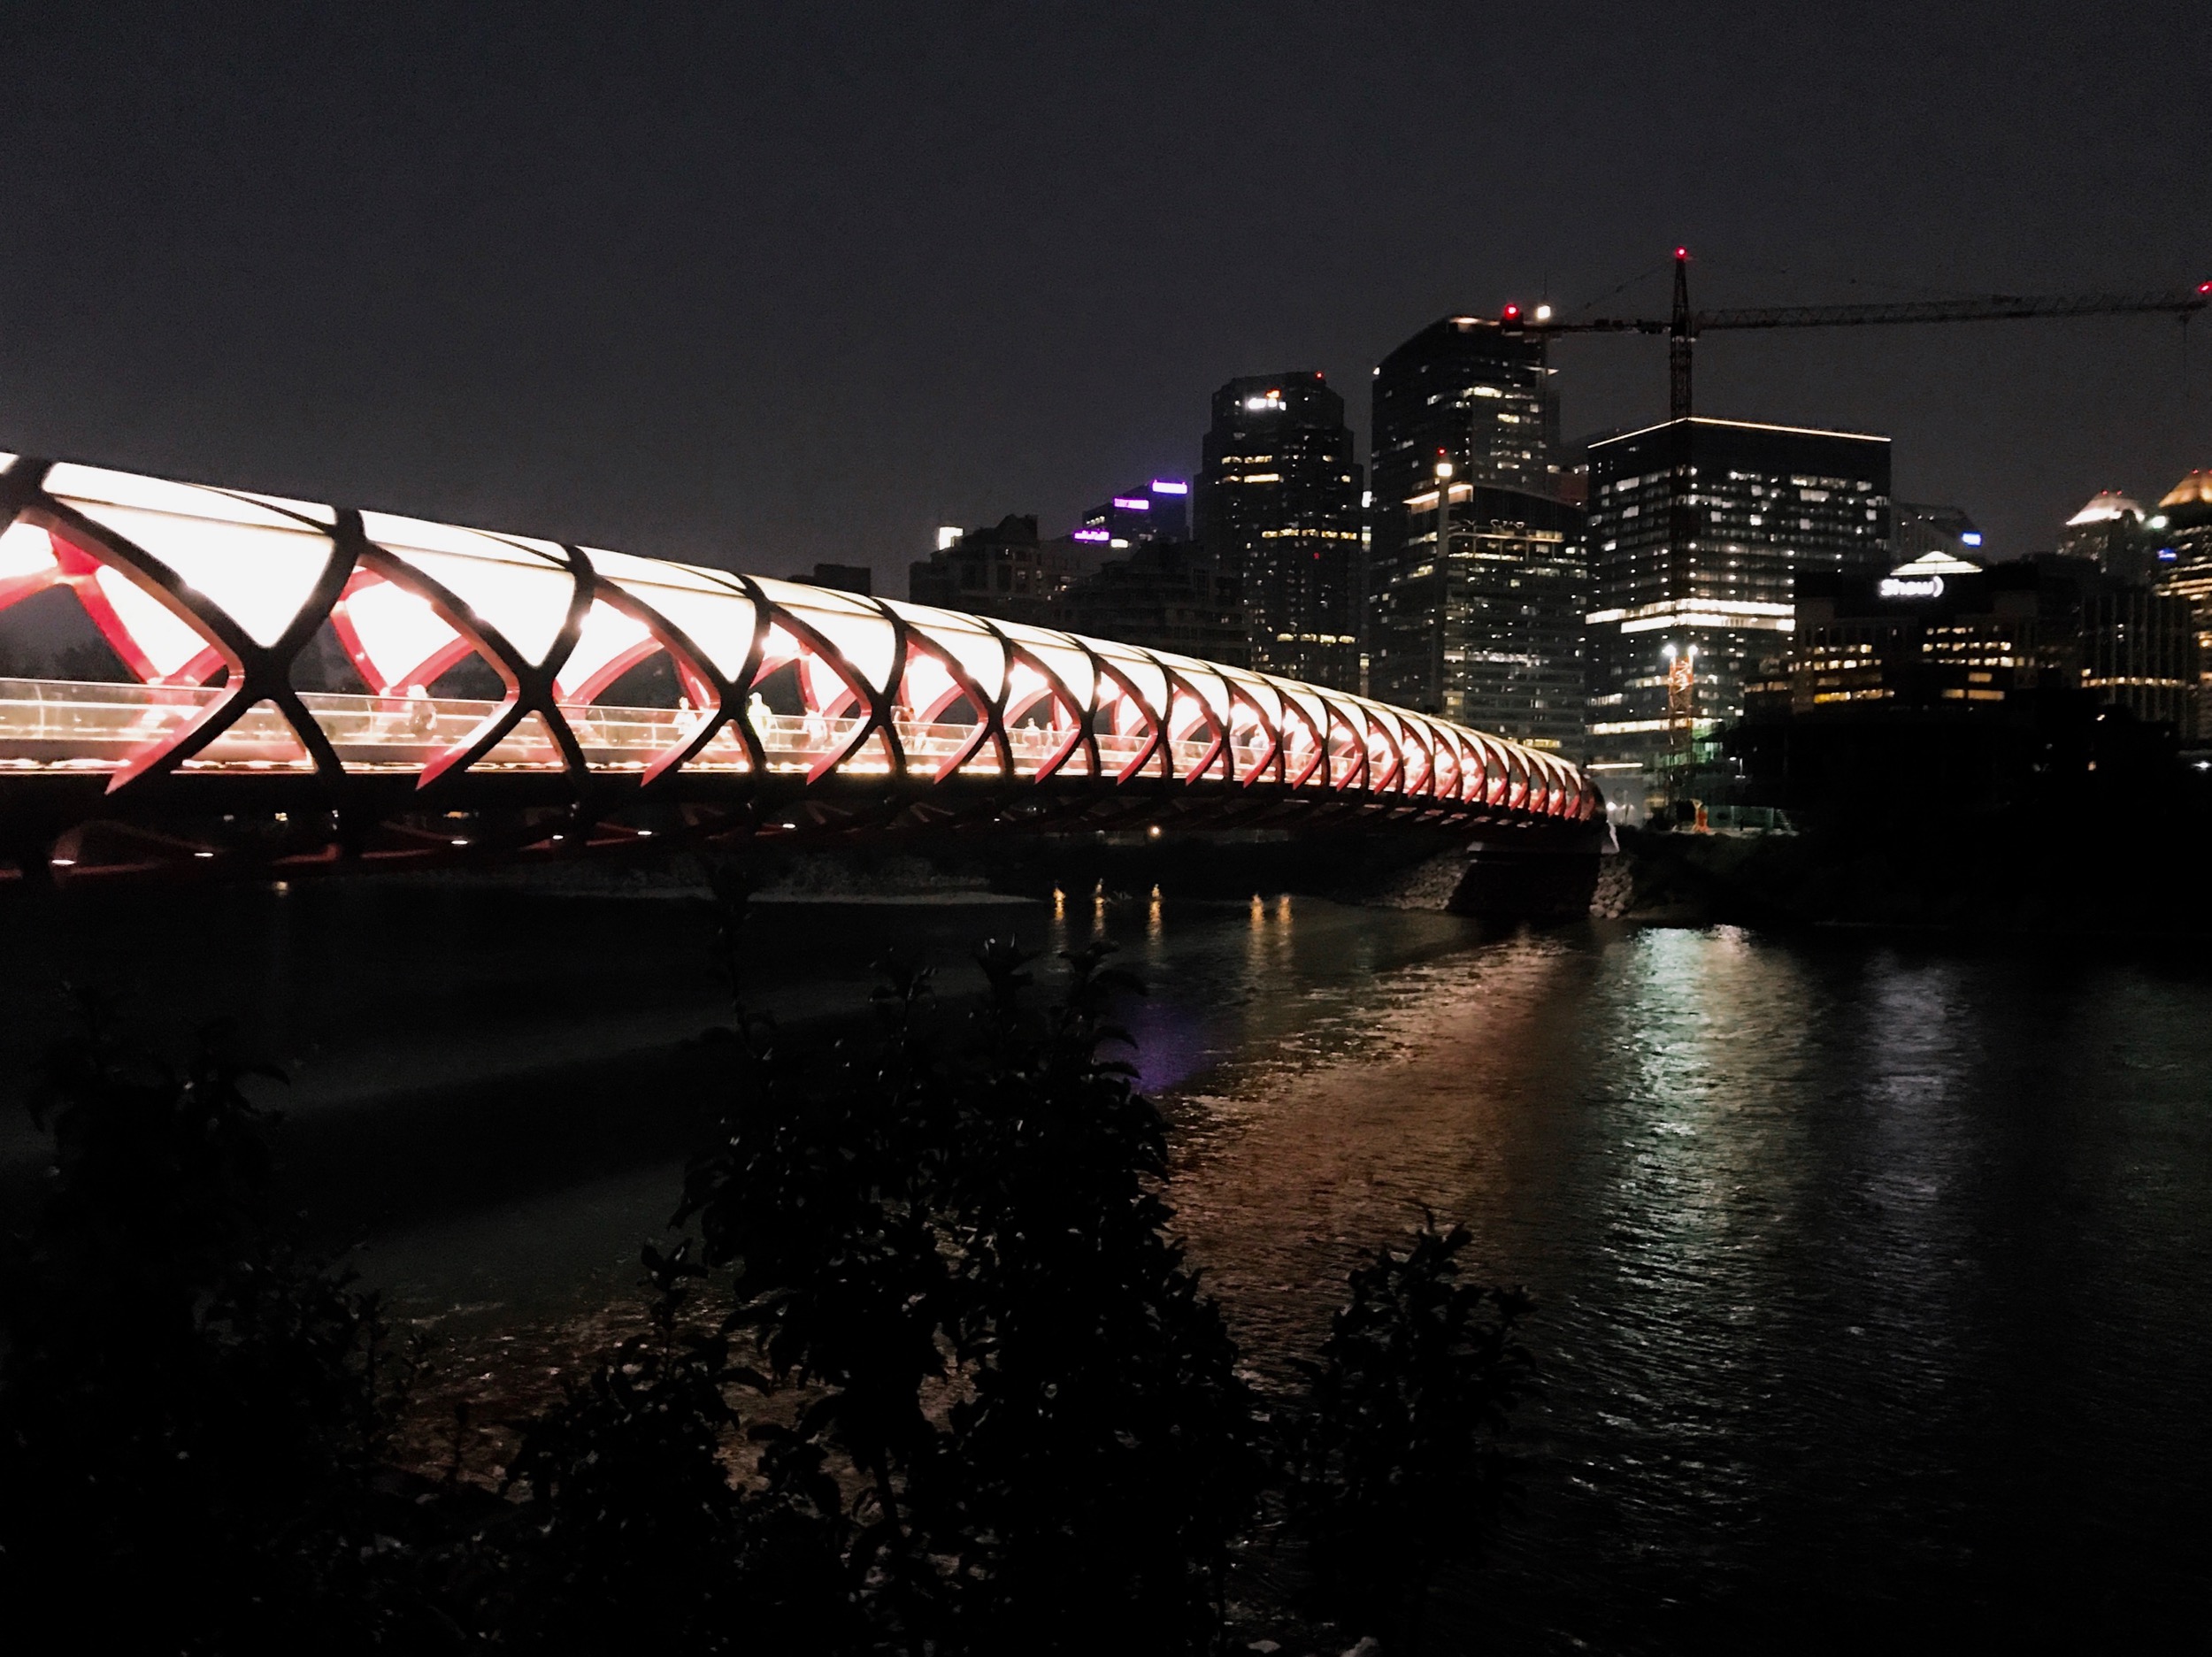  Part of bringing a camera wherever I go in August means more running photos. The daytime heat in midsummer is intense so sometimes I run at night. The Peace Bridge is always impressive and attracts Calgarians and tourists alike.&nbsp; 